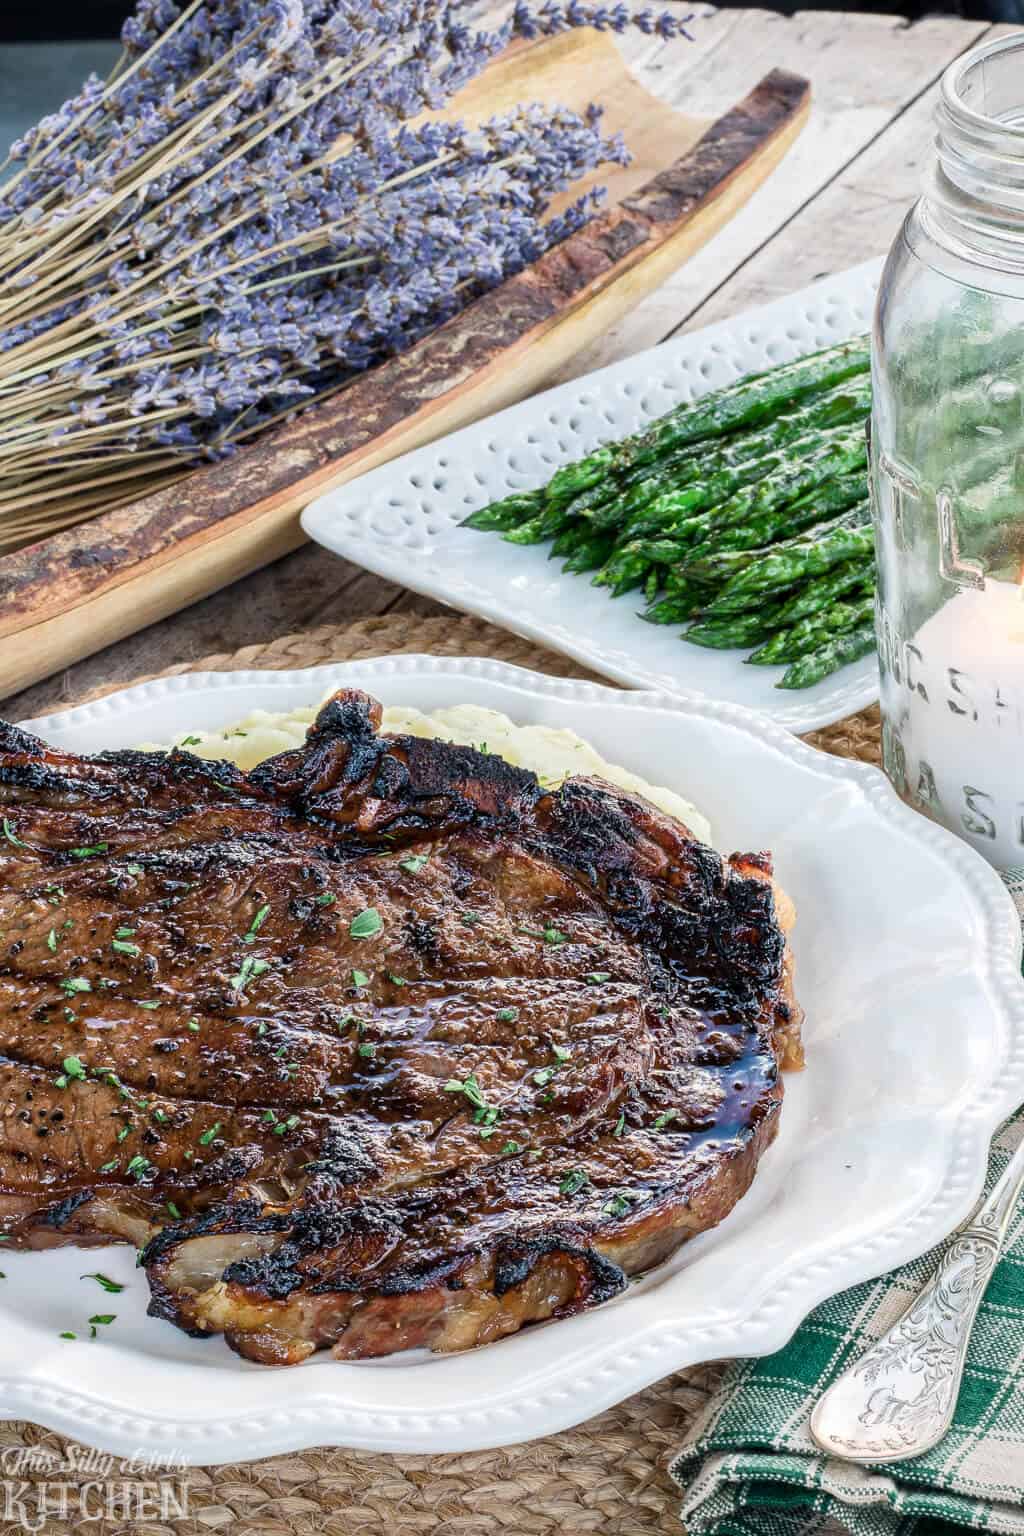 Best Steak Marinade for Grilled Rib Eye Steaks, grilled to perfection, you will make this recipe again and again! #Recipe from ThisSillyGirlsKitchen.com #ribeyesteak #steakmarinade #grilling #beststeakmarinade